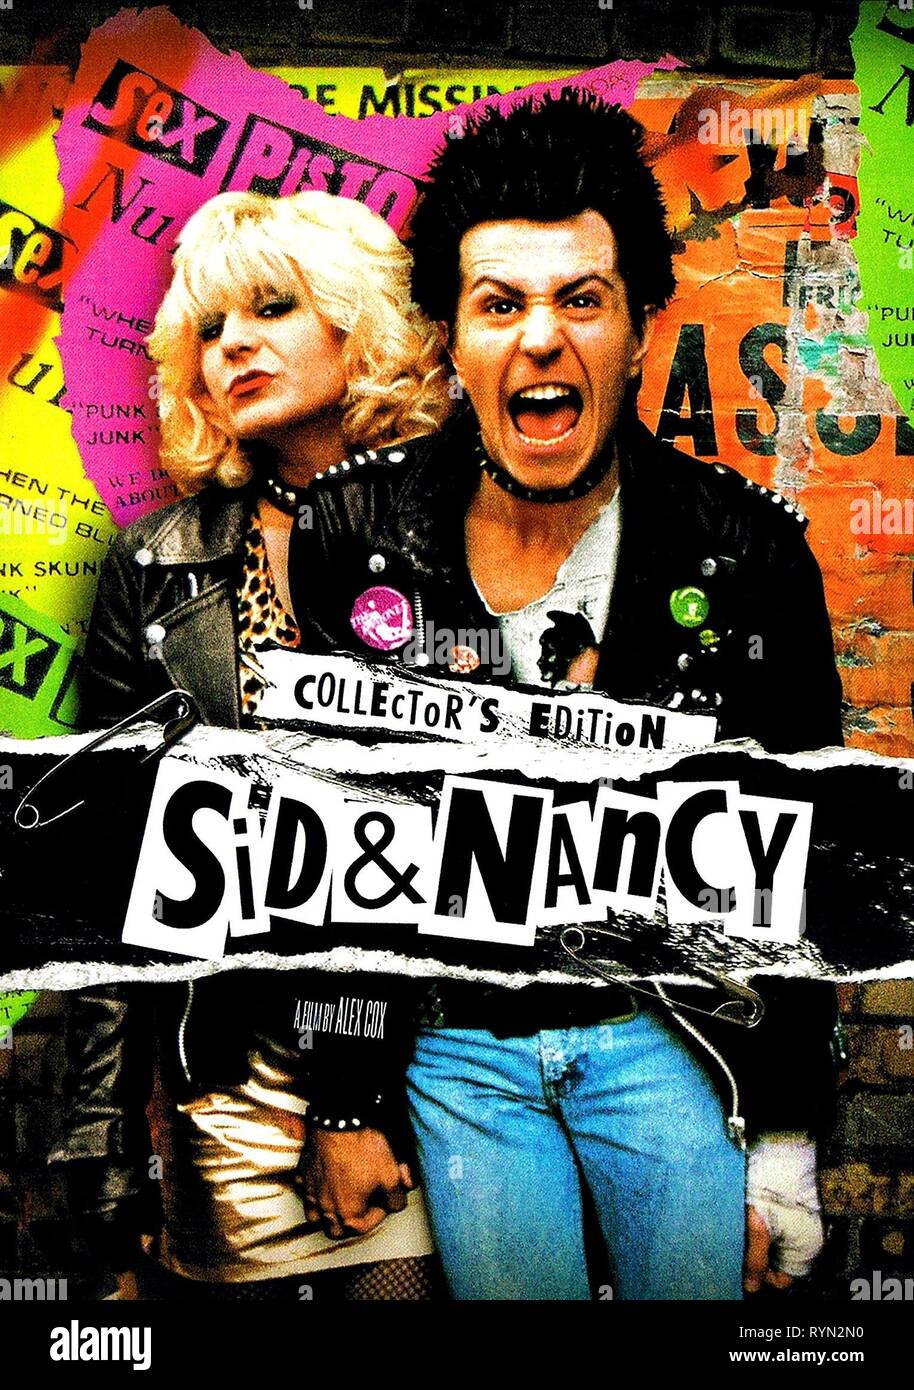 WEBB,POSTER, SID AND NANCY, 1986 Stock Photo